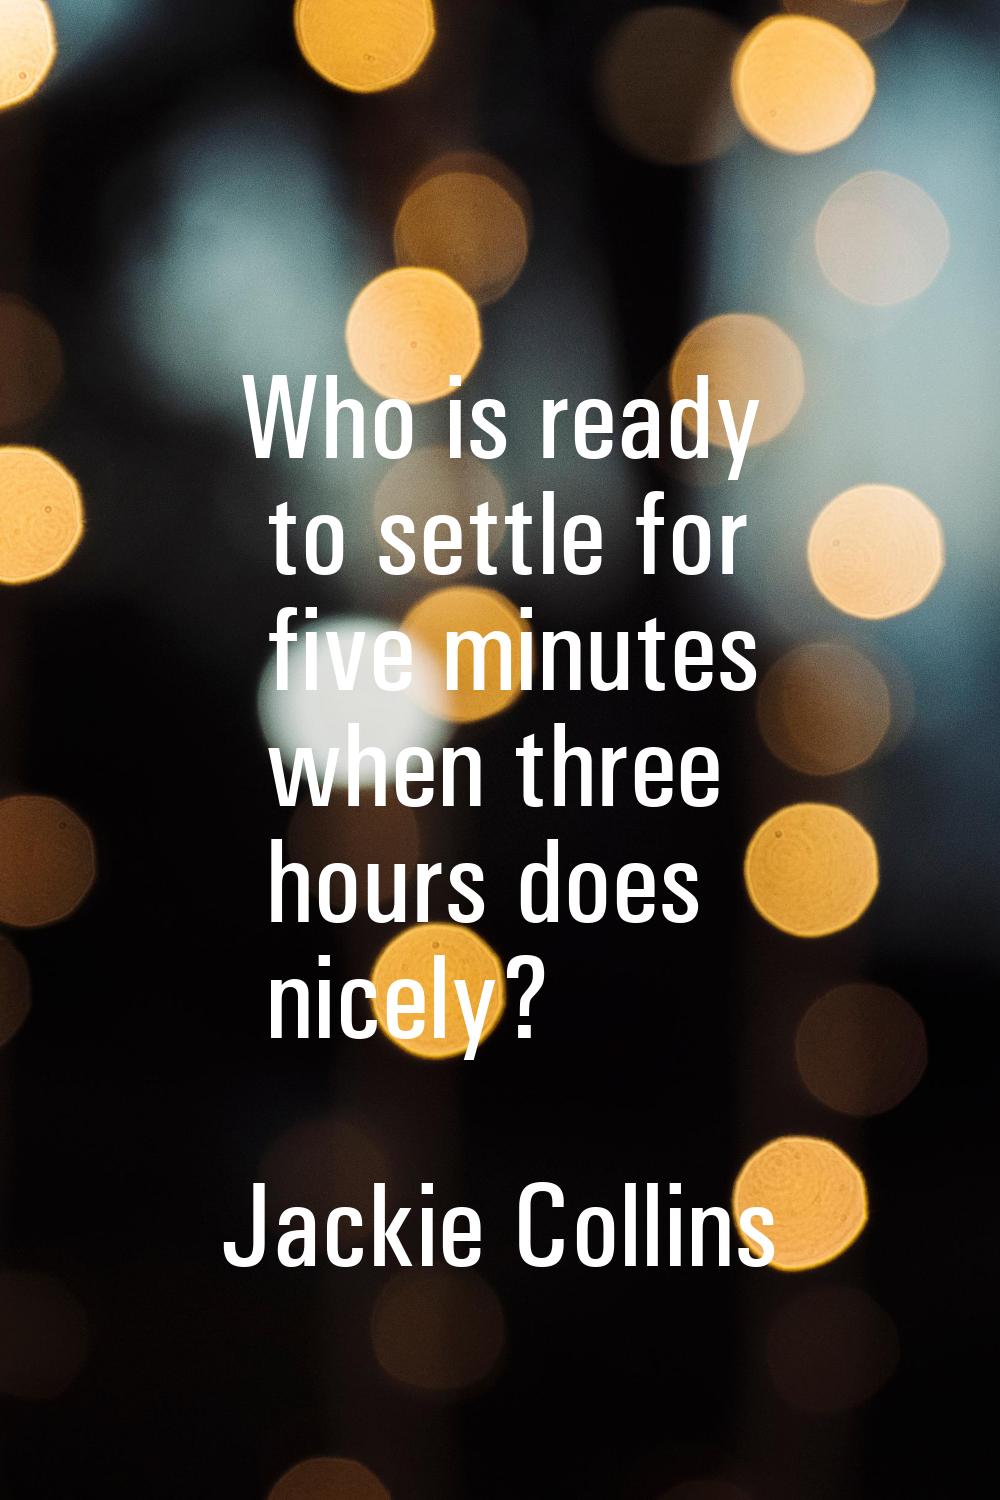 Who is ready to settle for five minutes when three hours does nicely?